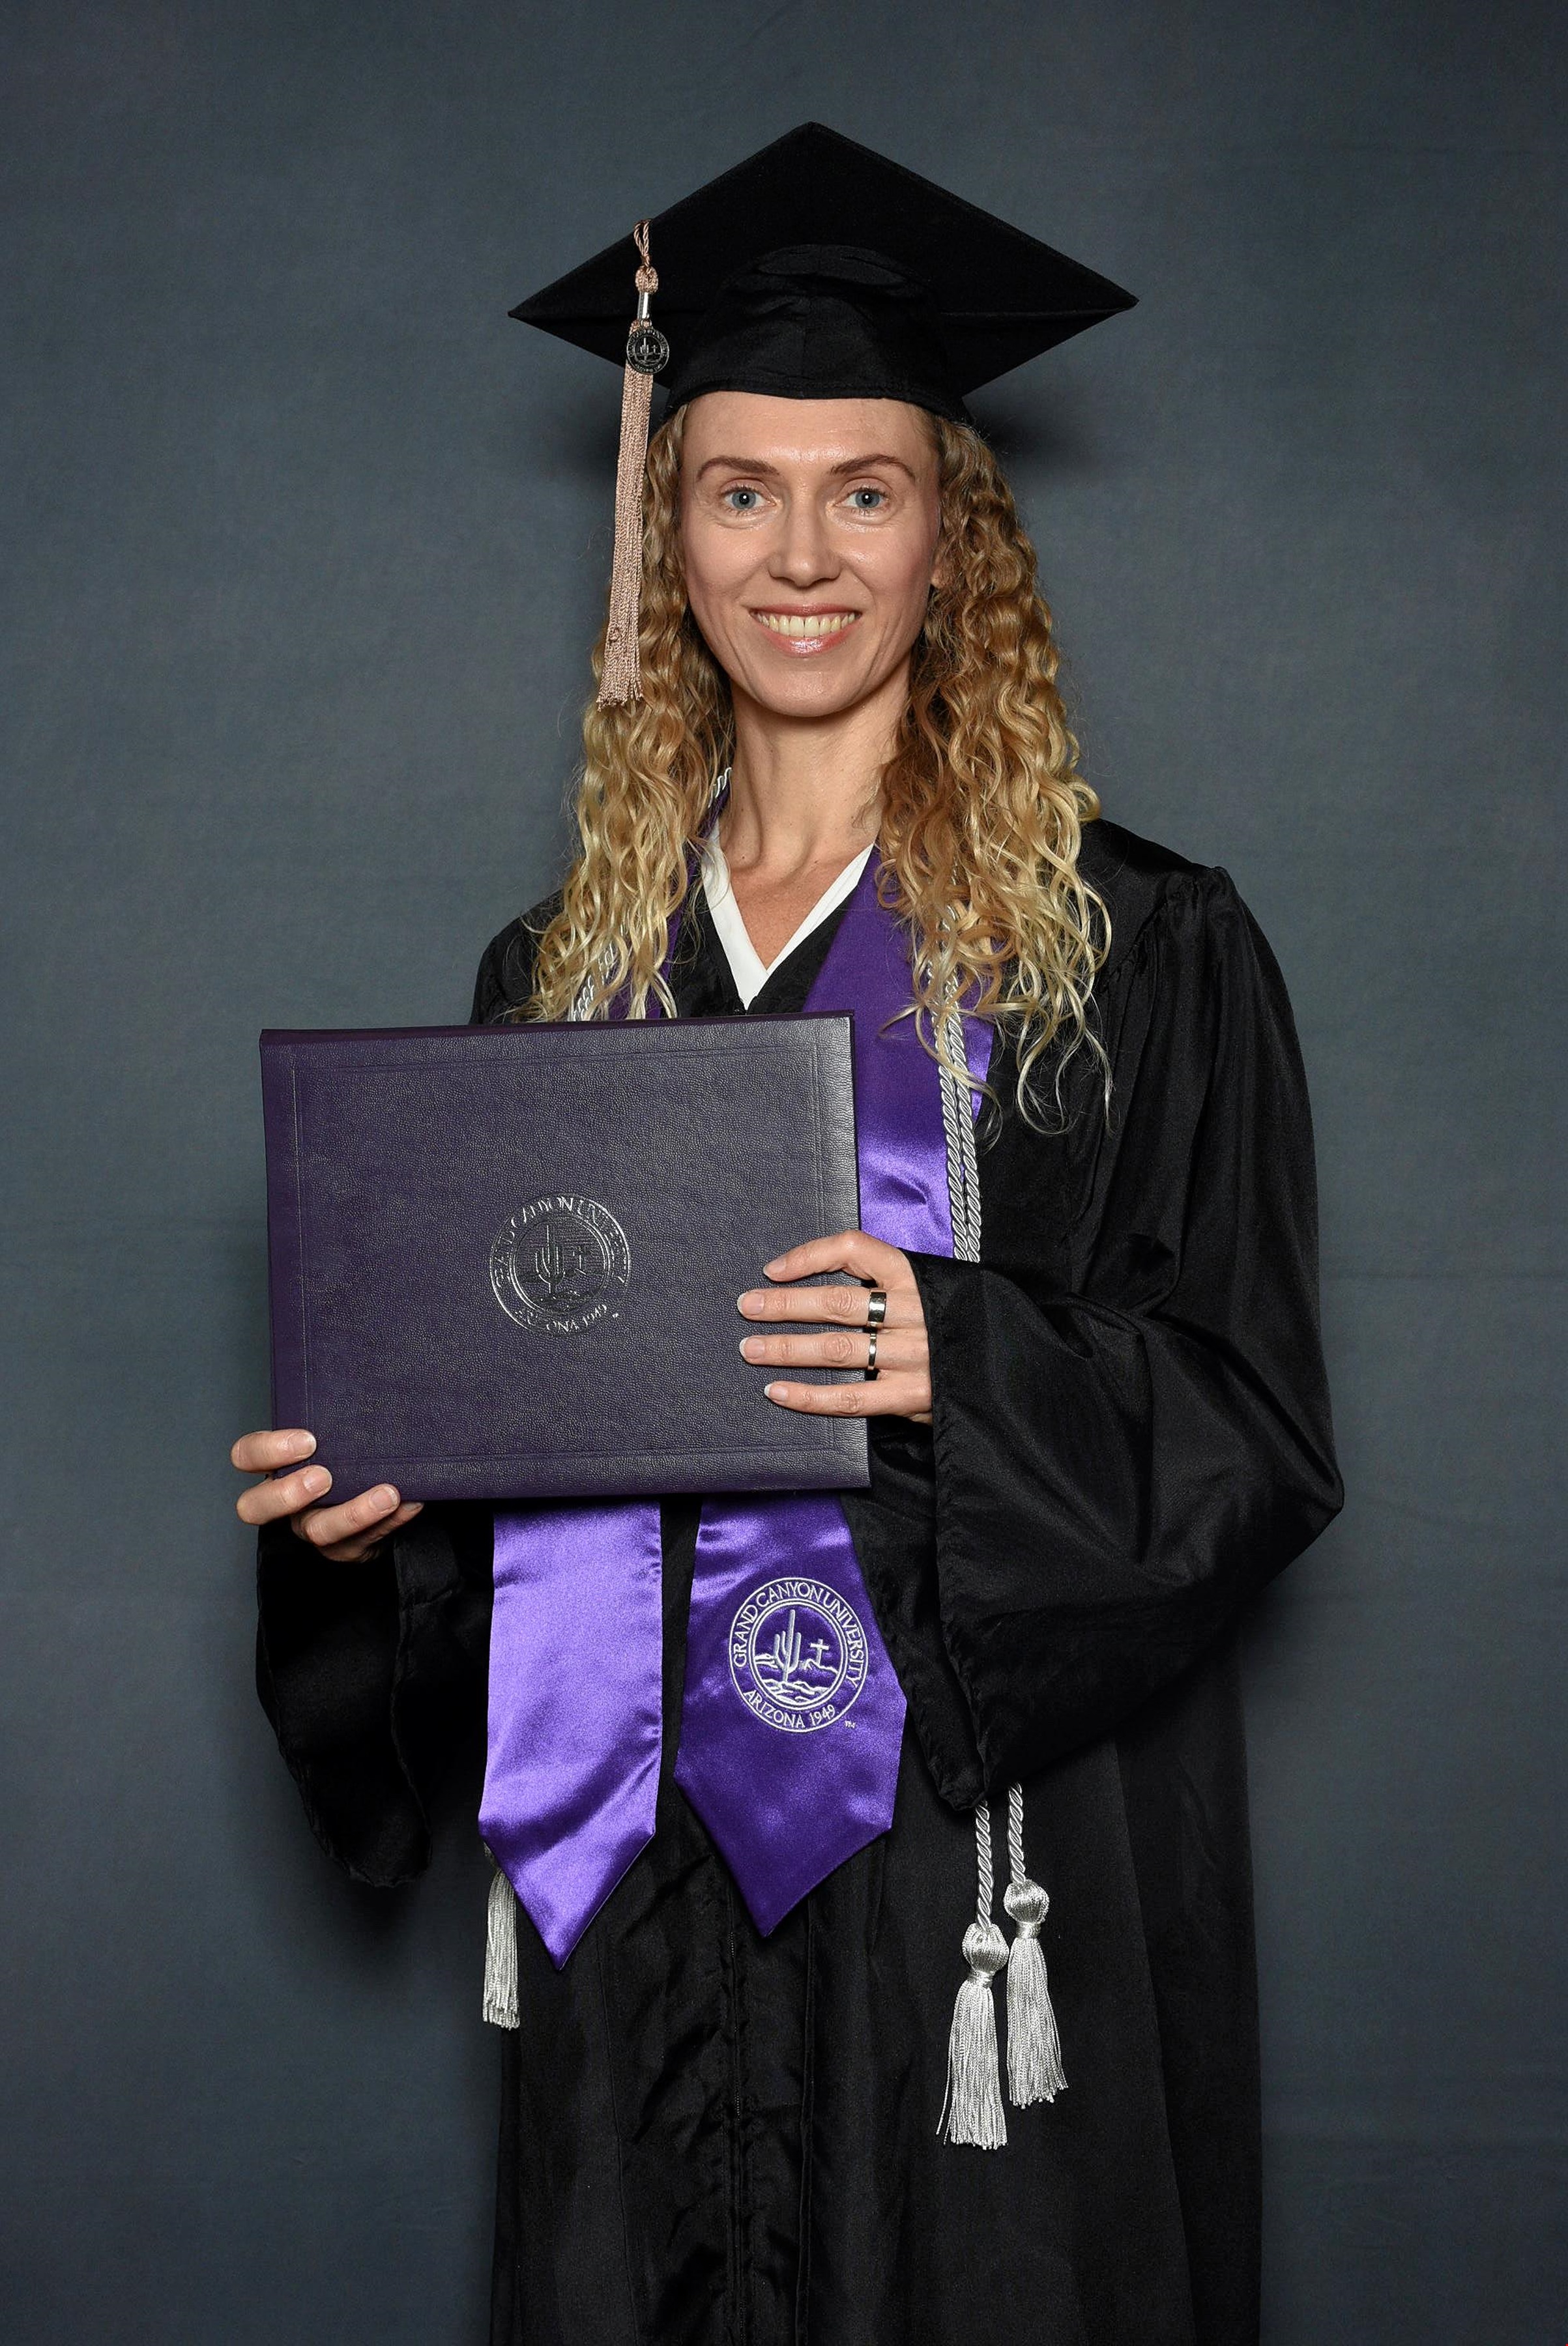 Lauren Edge in her GCU graduation cap and gown after earning her Bachelor's in accounting